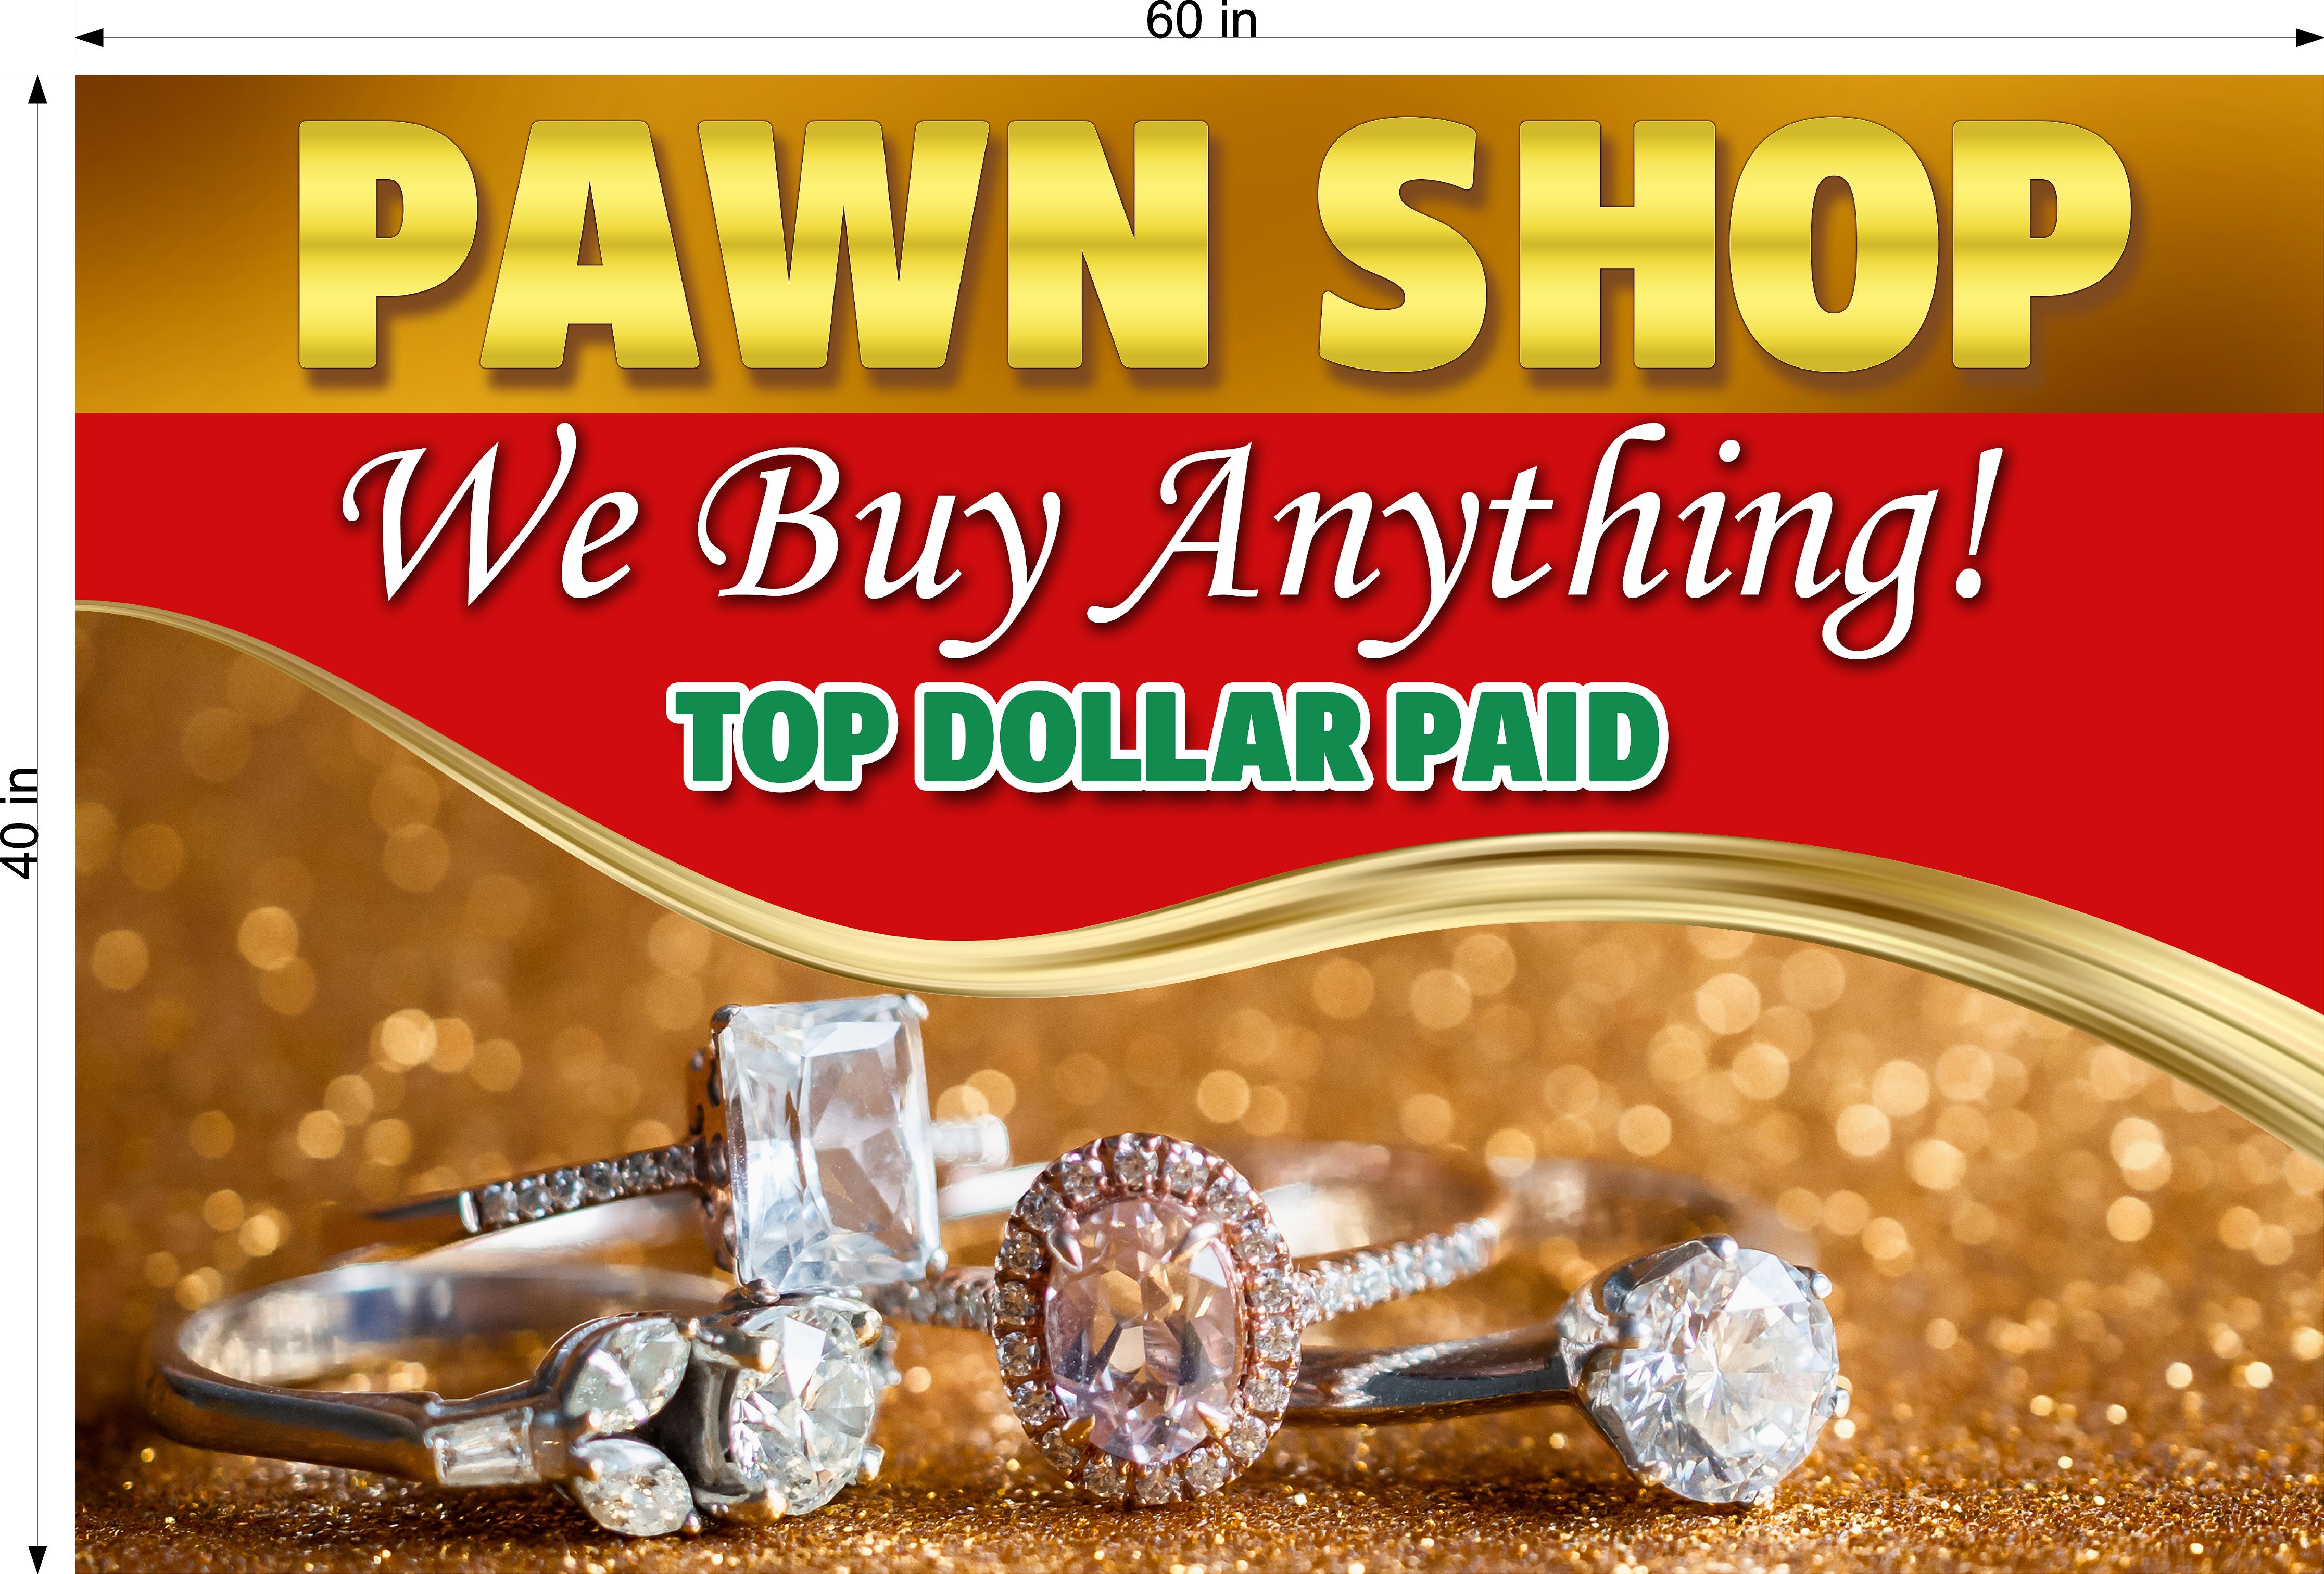 Pawn Shop 09 Photo-Realistic Paper Poster Premium Interior Inside Sign Buy Gold Silver Jewelry Wall Window Non-Laminated Horizontal